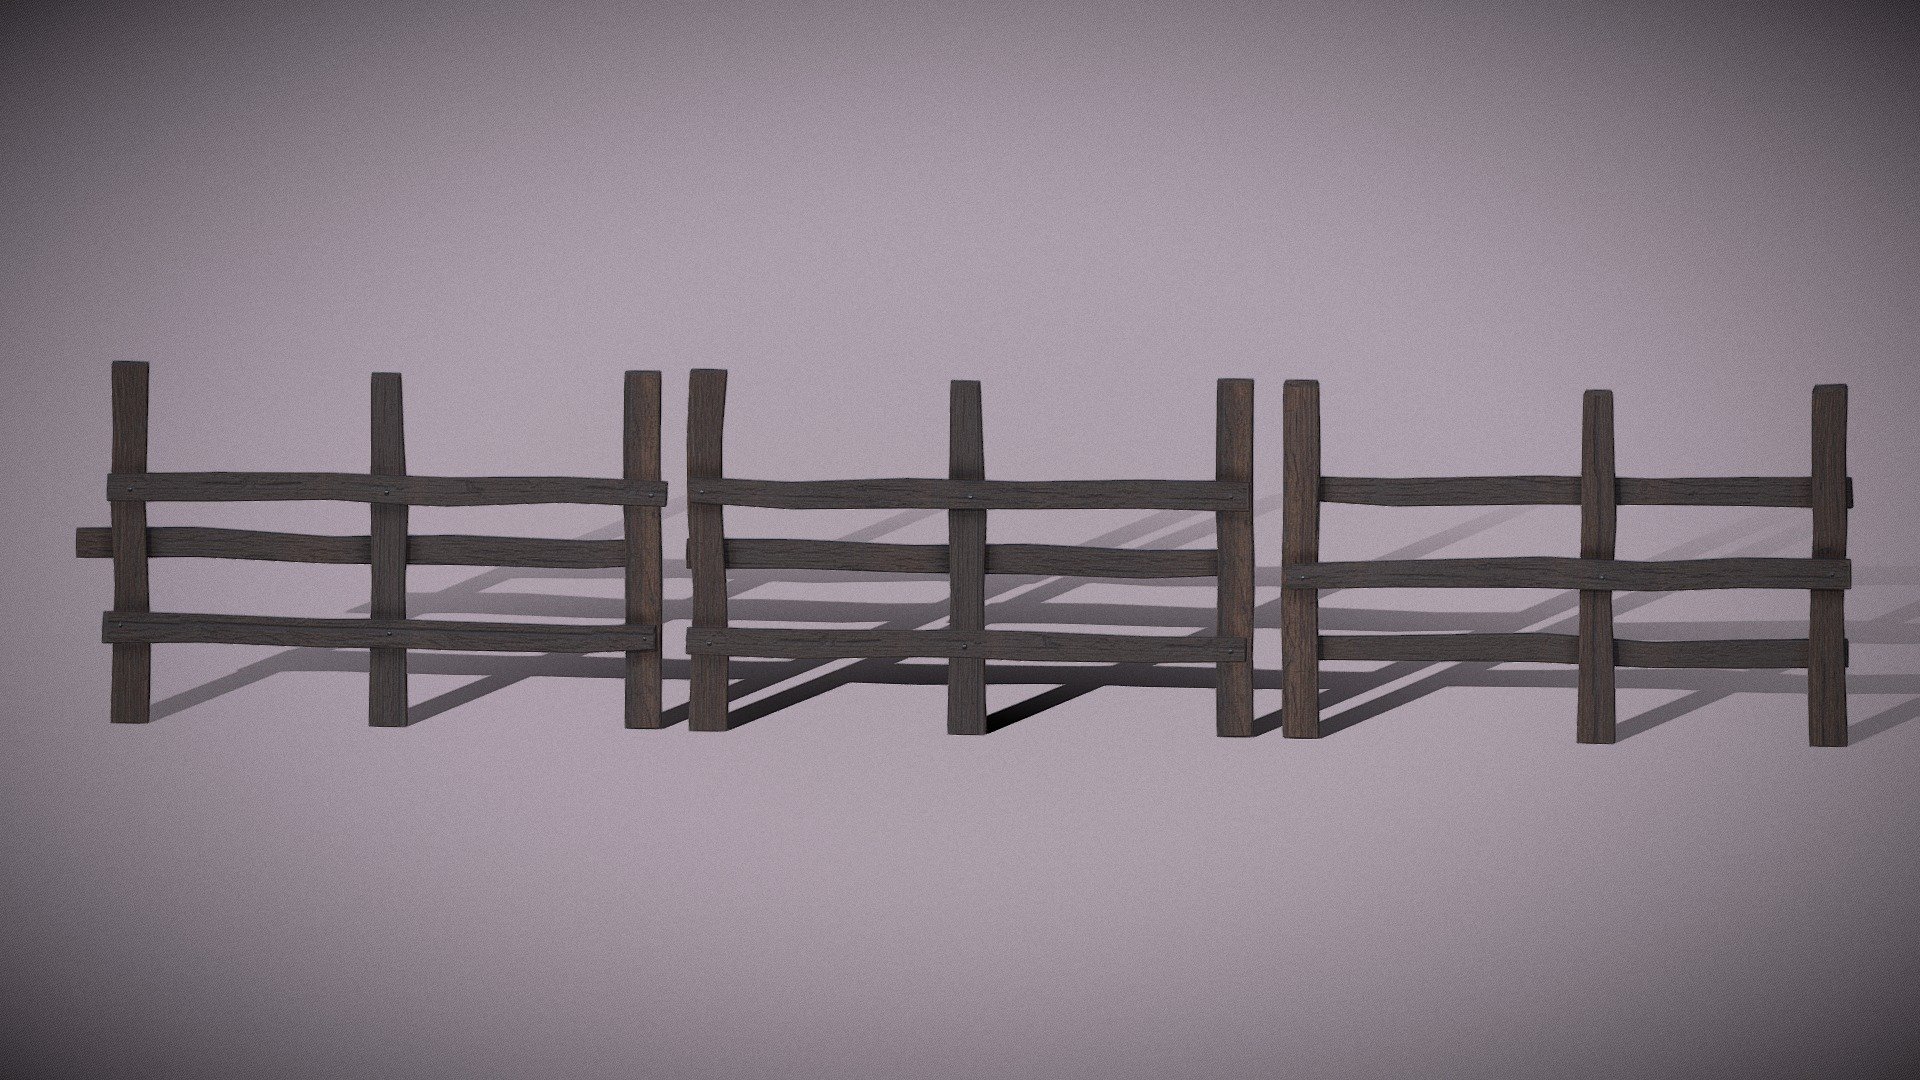 An old wooden fence. Low poly, meant as a game asset. Comes with 4k textures.
 Comes as part of a kit 3d model